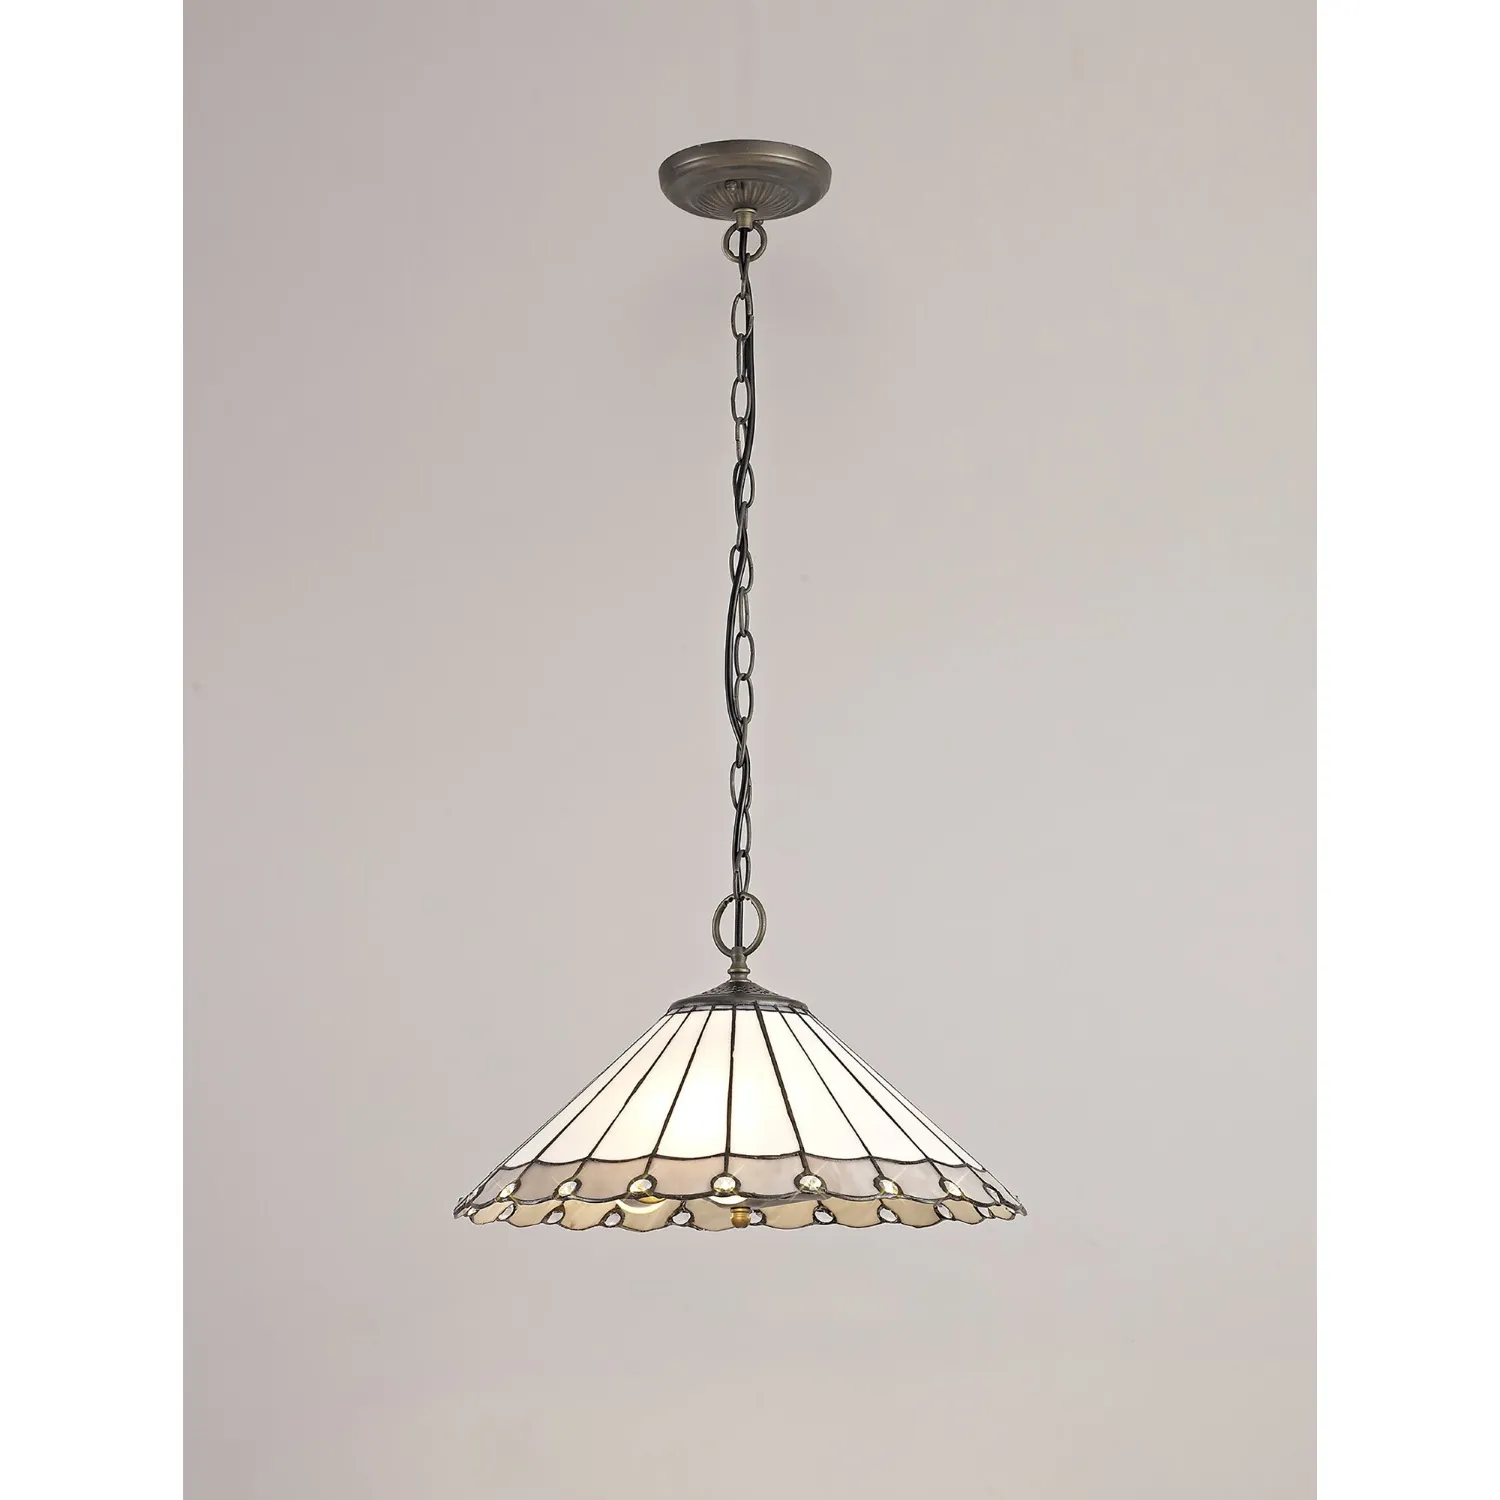 Ware 3 Light Downlighter Pendant E27 With 40cm Tiffany Shade, Grey Cream Crystal Aged Antique Brass